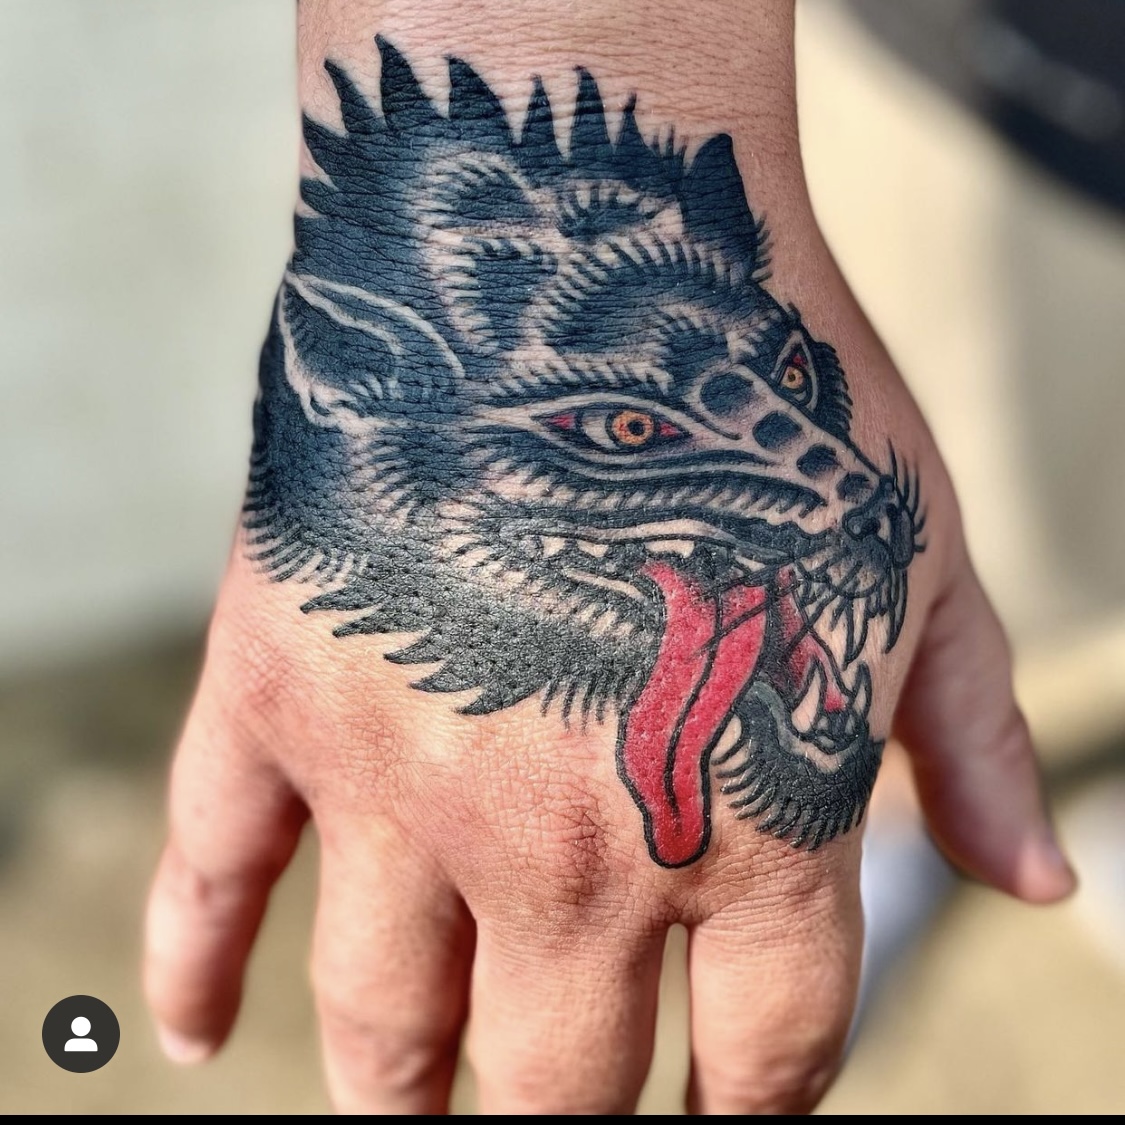 Tattoo of a wolf on a man's hand